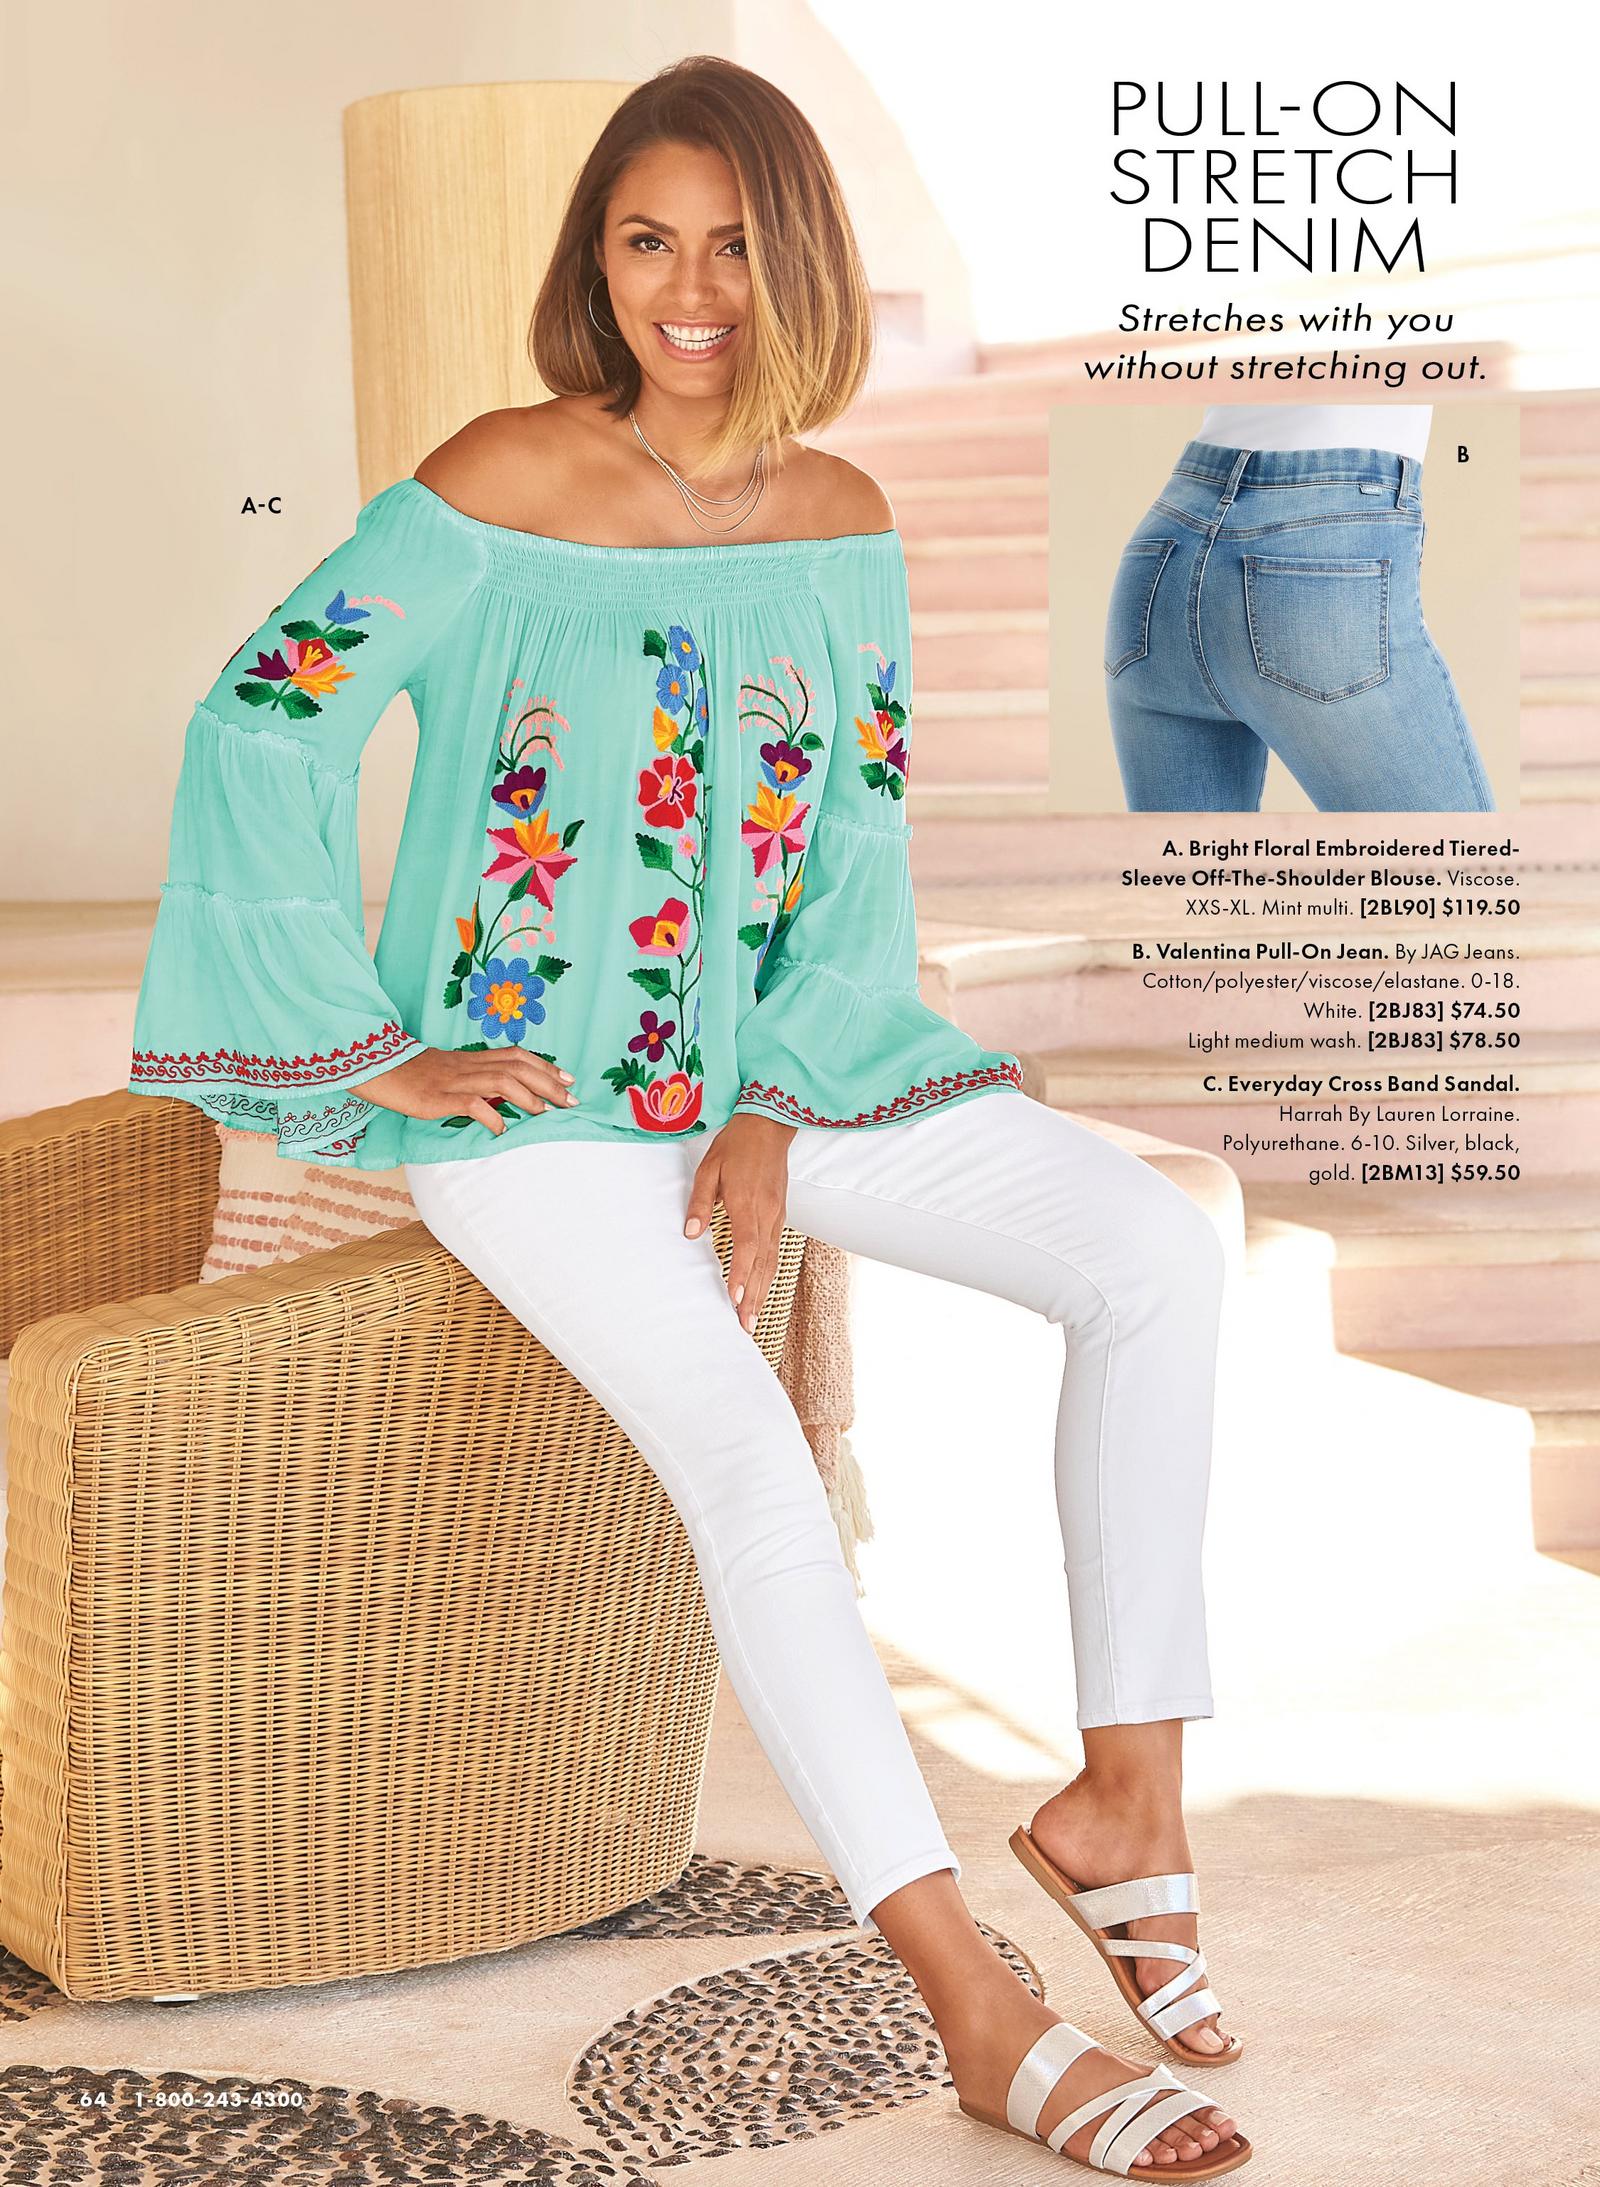 model wearing a mint off-the-shoulder flare-sleeve floral embroidered top, white jeans, and silver strappy sandals.